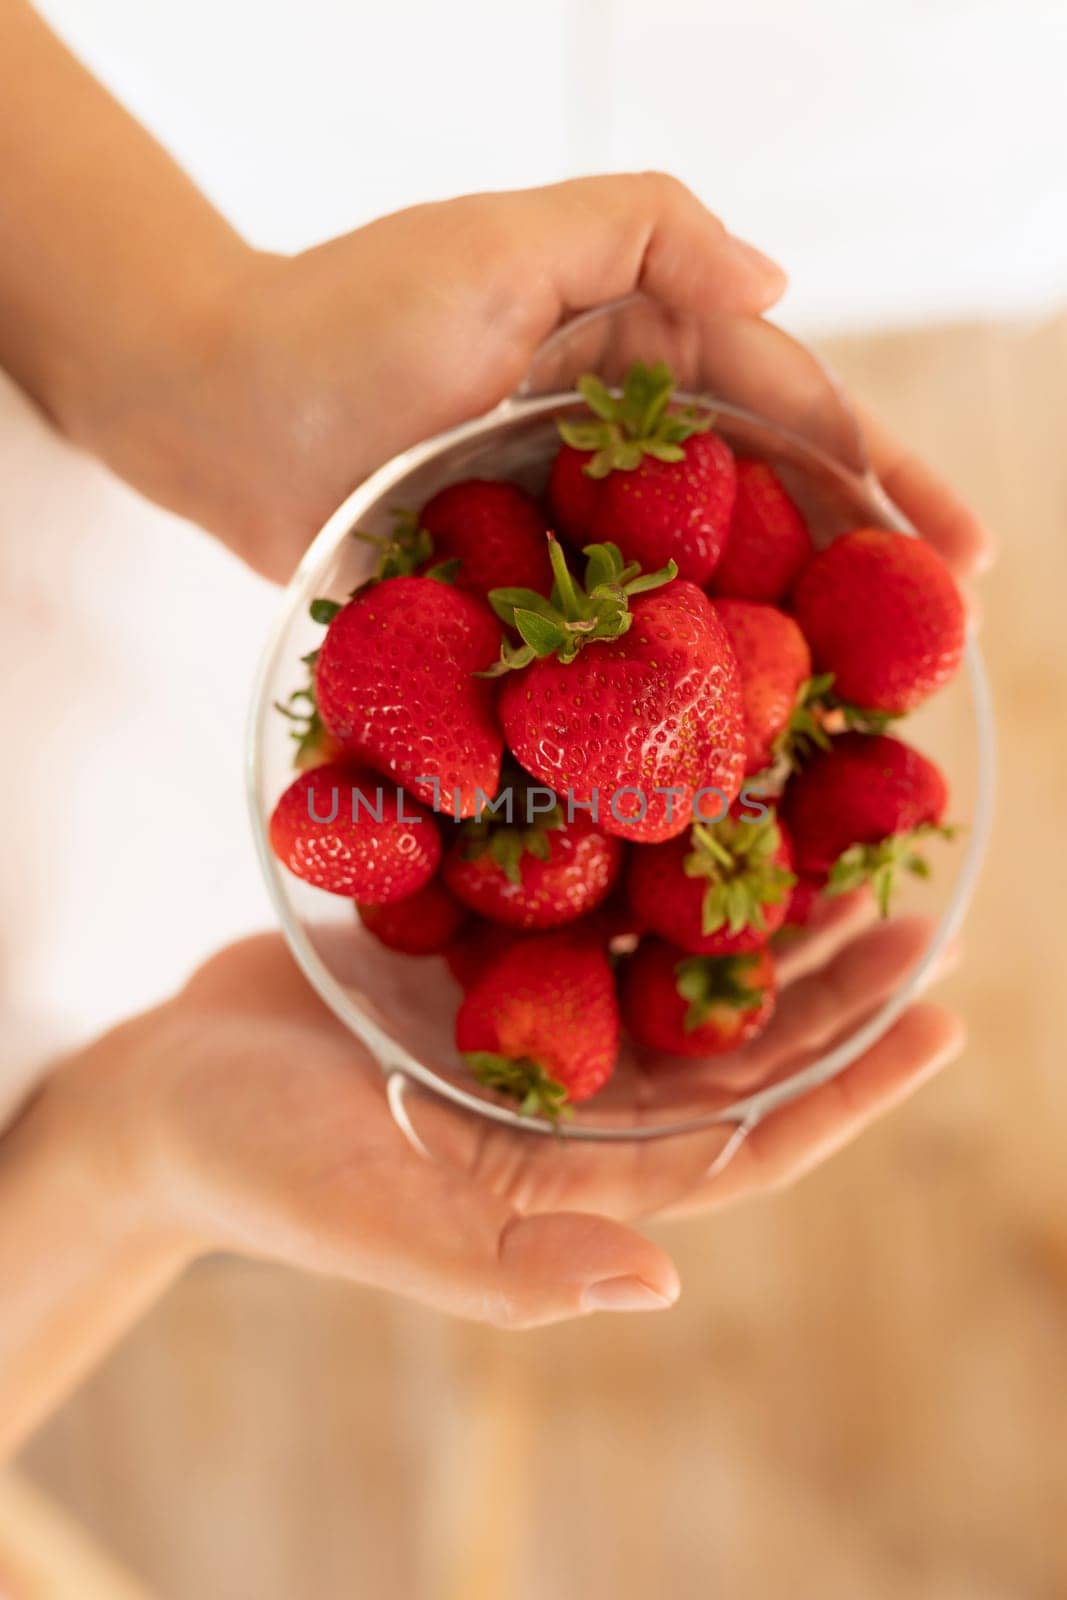 A close-up of fresh farm strawberries in hand by TRMK